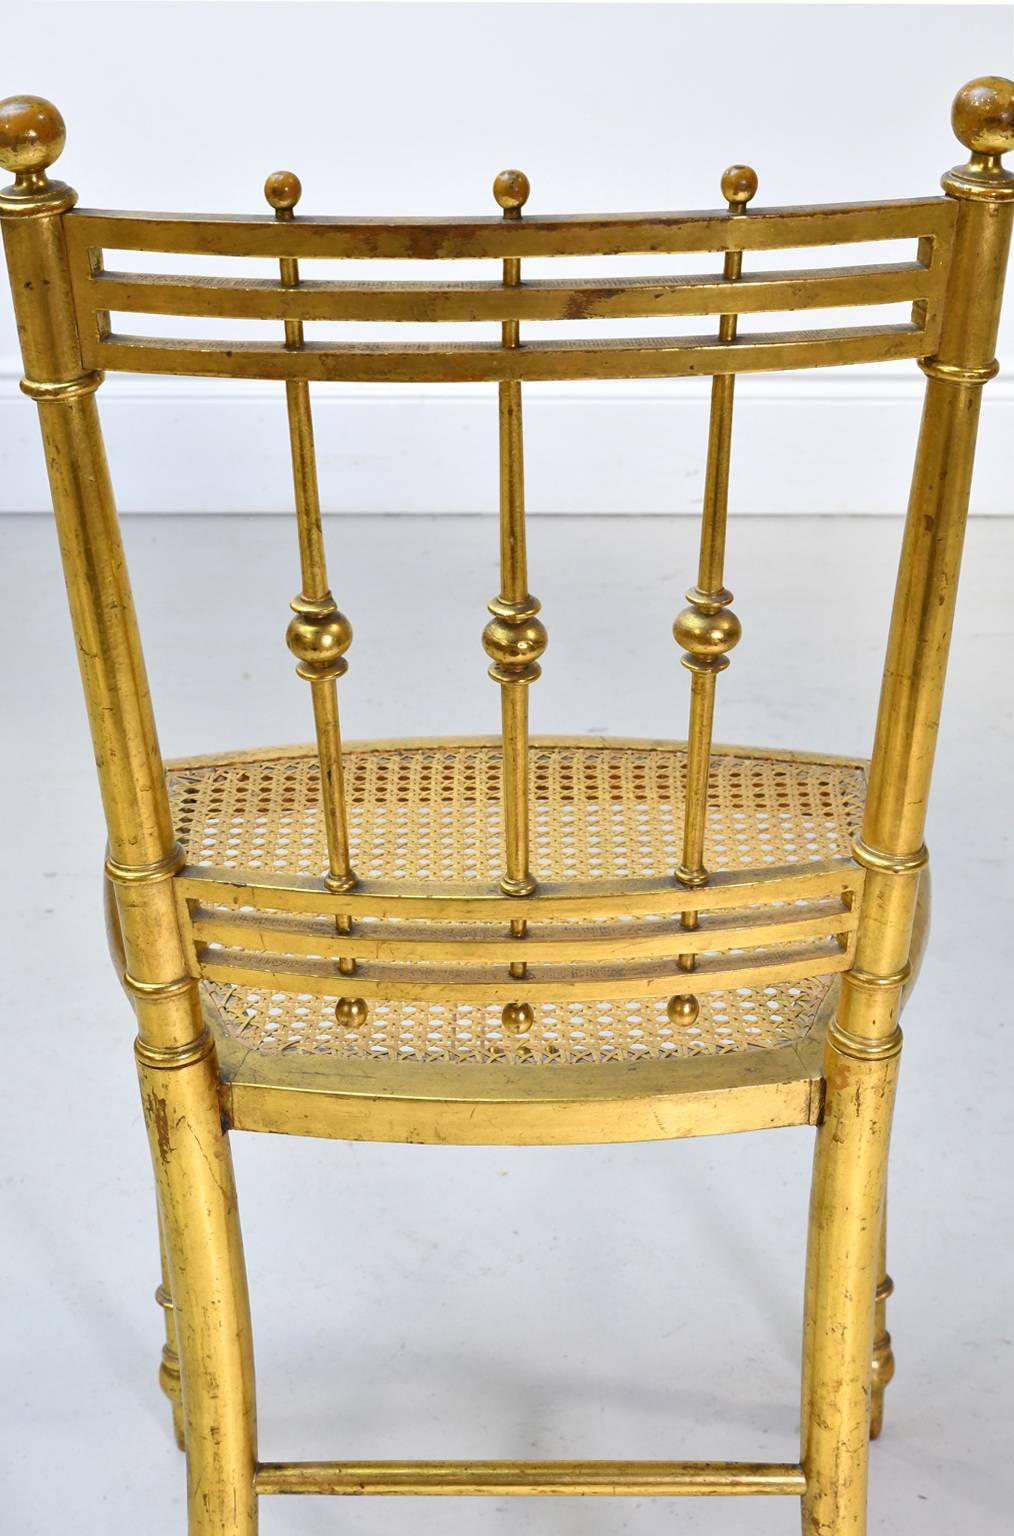 Early 20th Century French Belle Époque Chair in Gilt-Wood with Cane Seat. For Sale 5